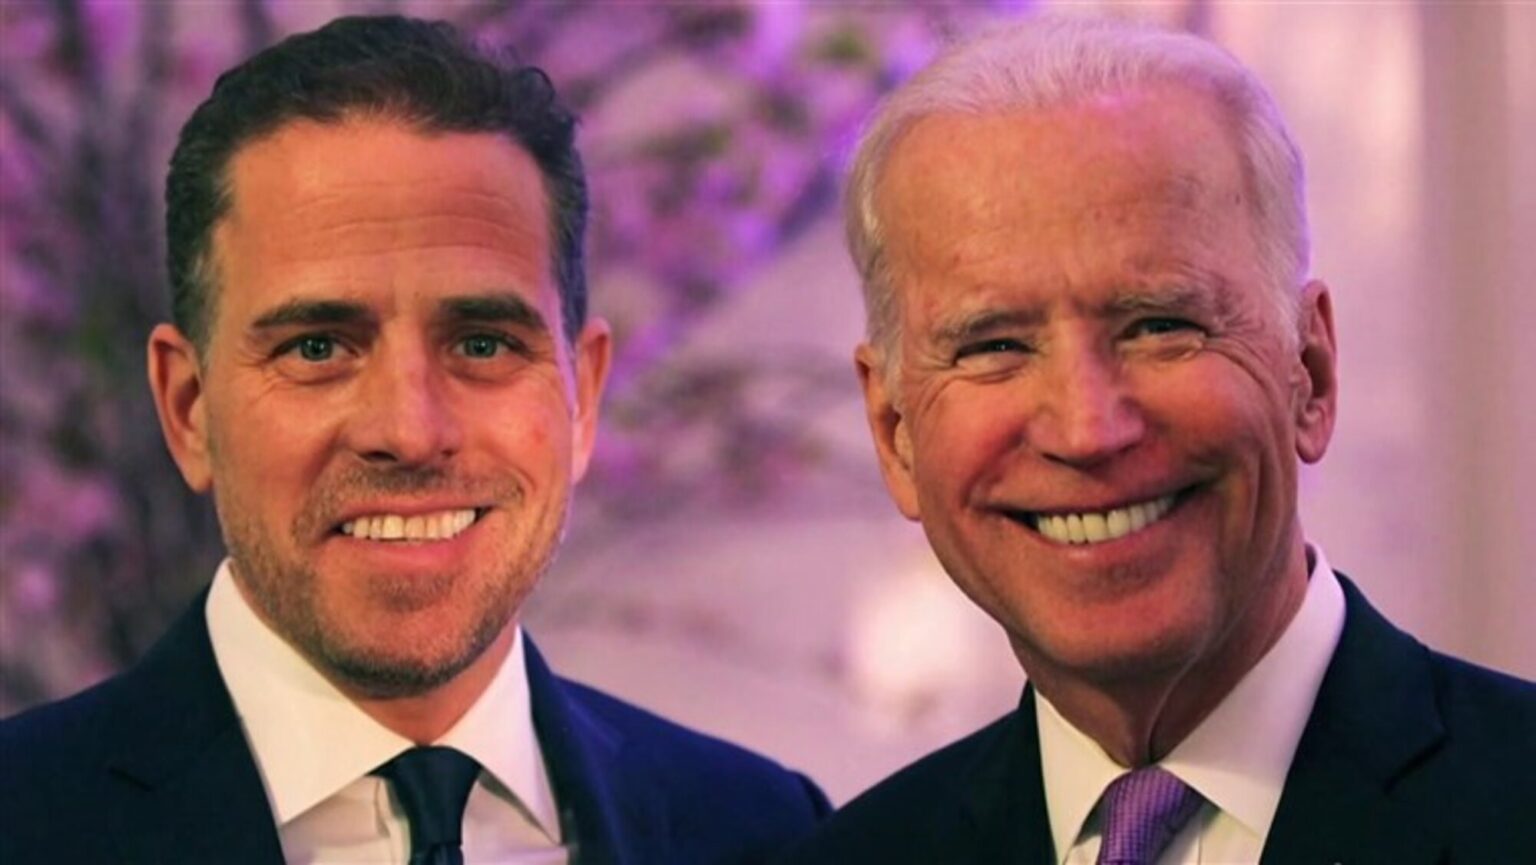 Do you think Hunter Biden actually needs a bigger net worth? Take a look if Joe Biden's son is actually selling U.S policies for a better paycheck.